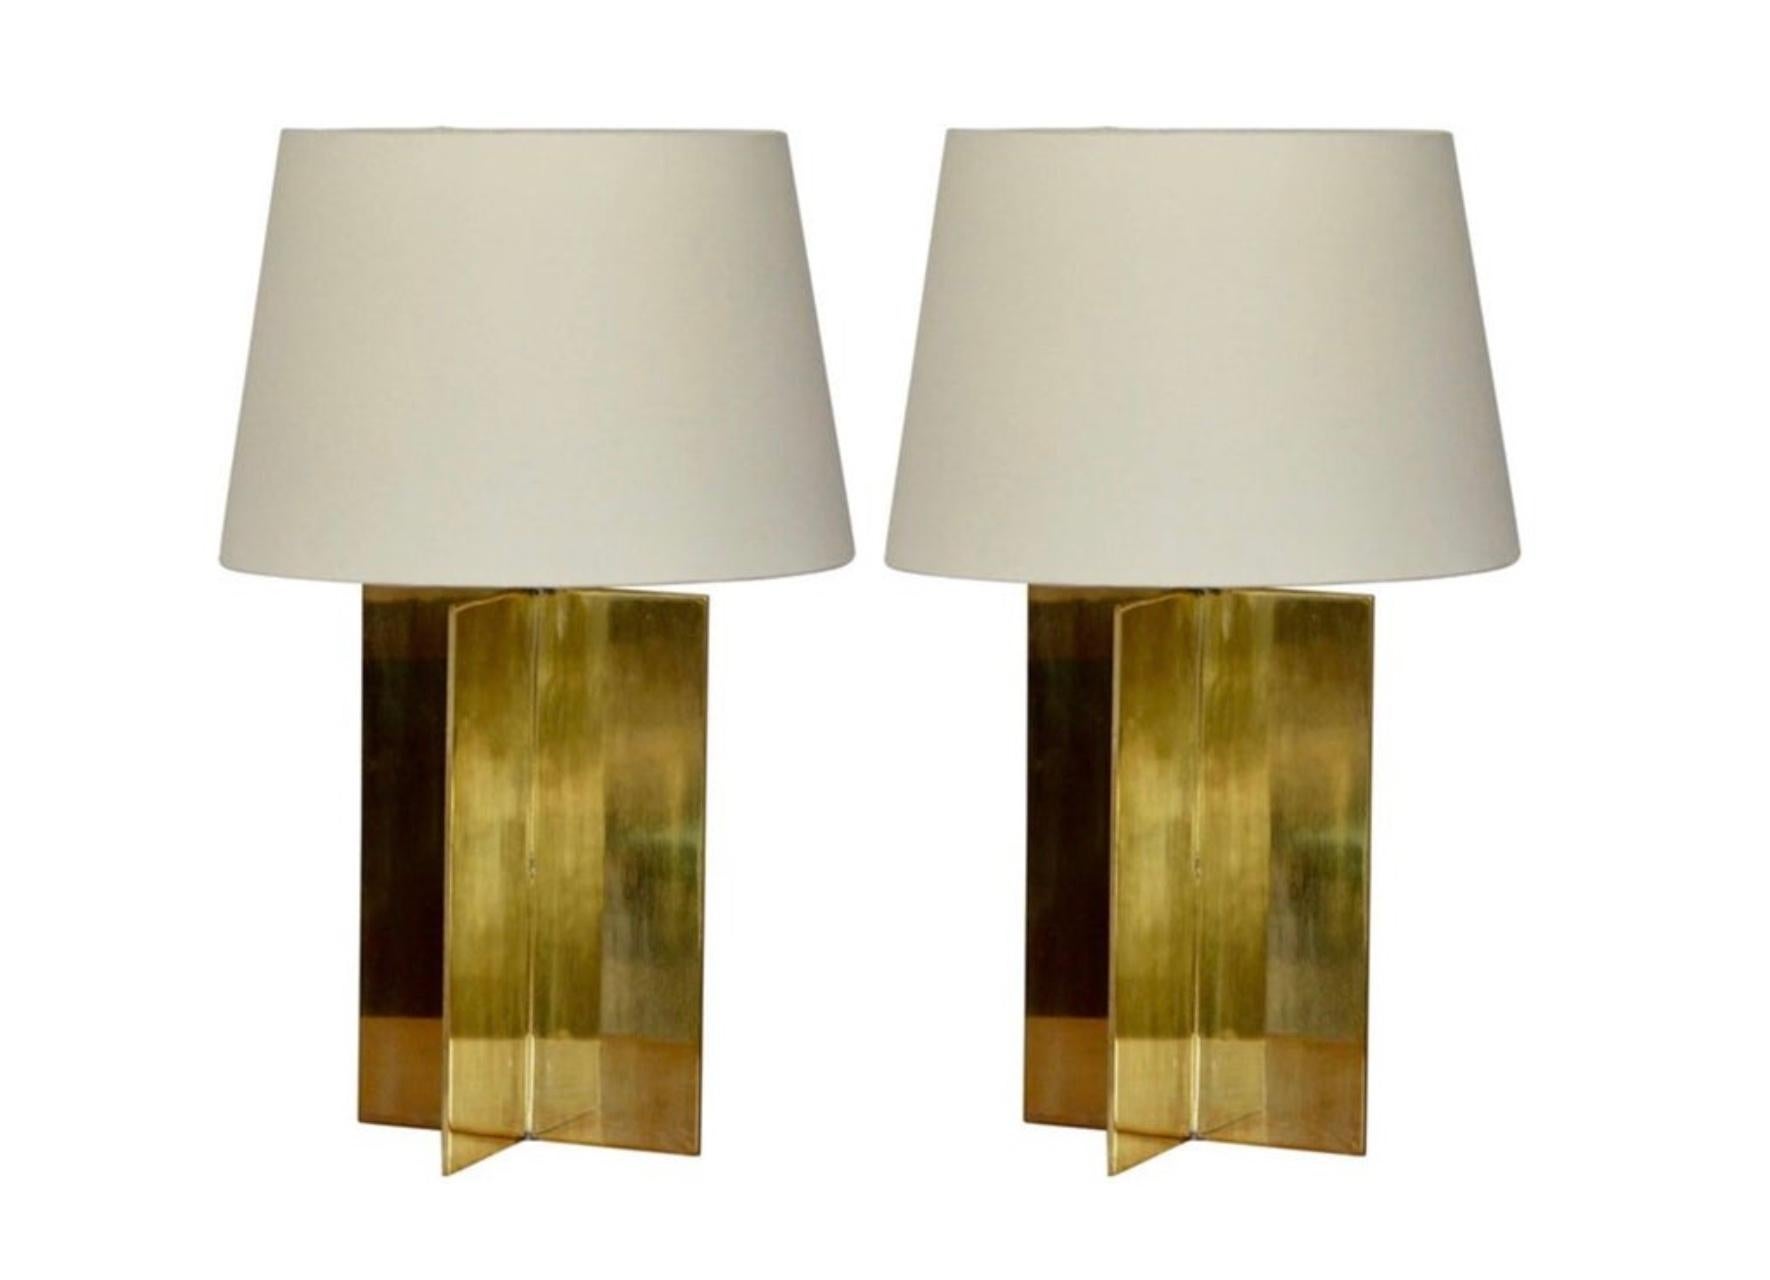 Pair of ‘Croisillon’ solid brass and parchment lamps by Design Frères. Wired with twist cord. European style shade with base ring (no finial).

Wired with UL listed parts and twist cord. Matching parchment European-style shade included. 

Dimensions